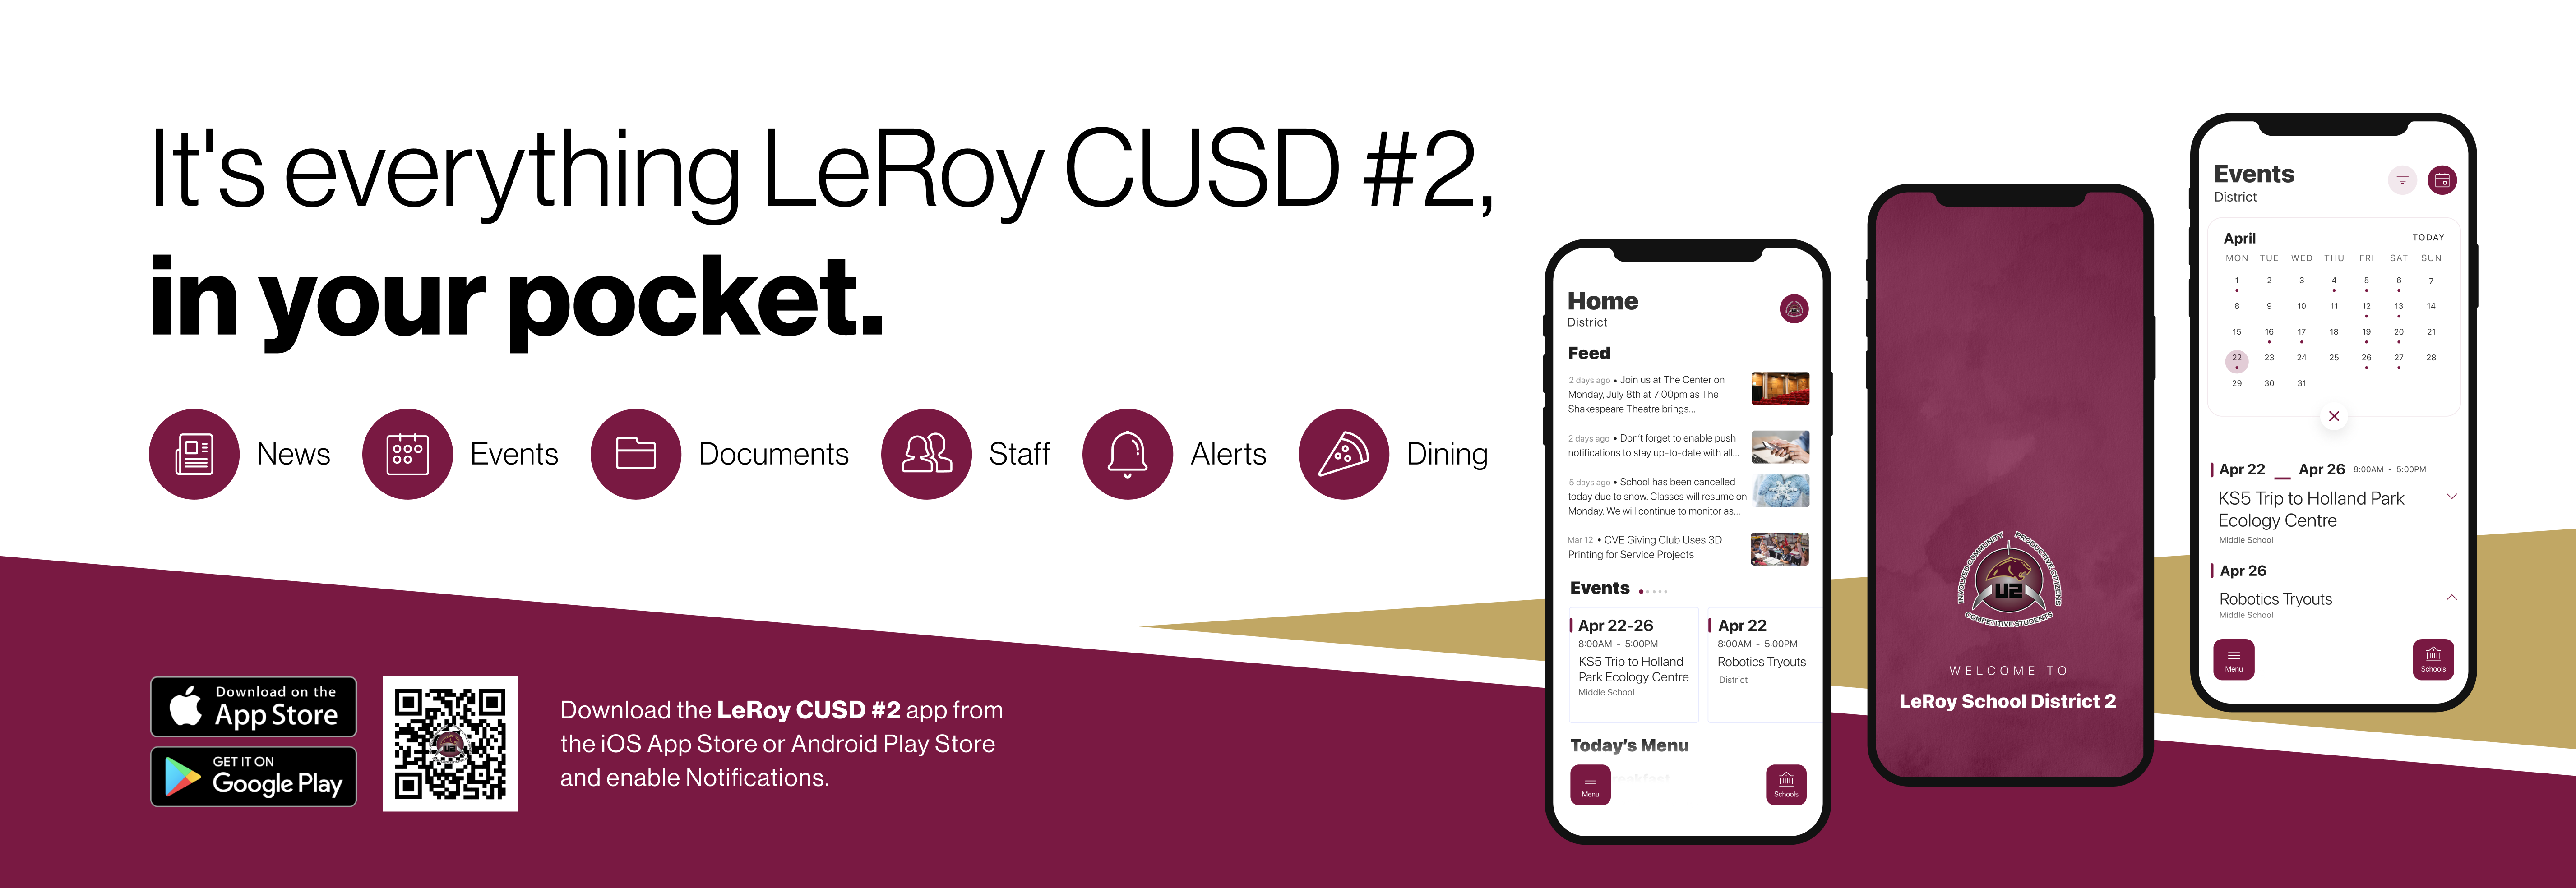 It's everything LeRoy CUSD #2 in your pocket.